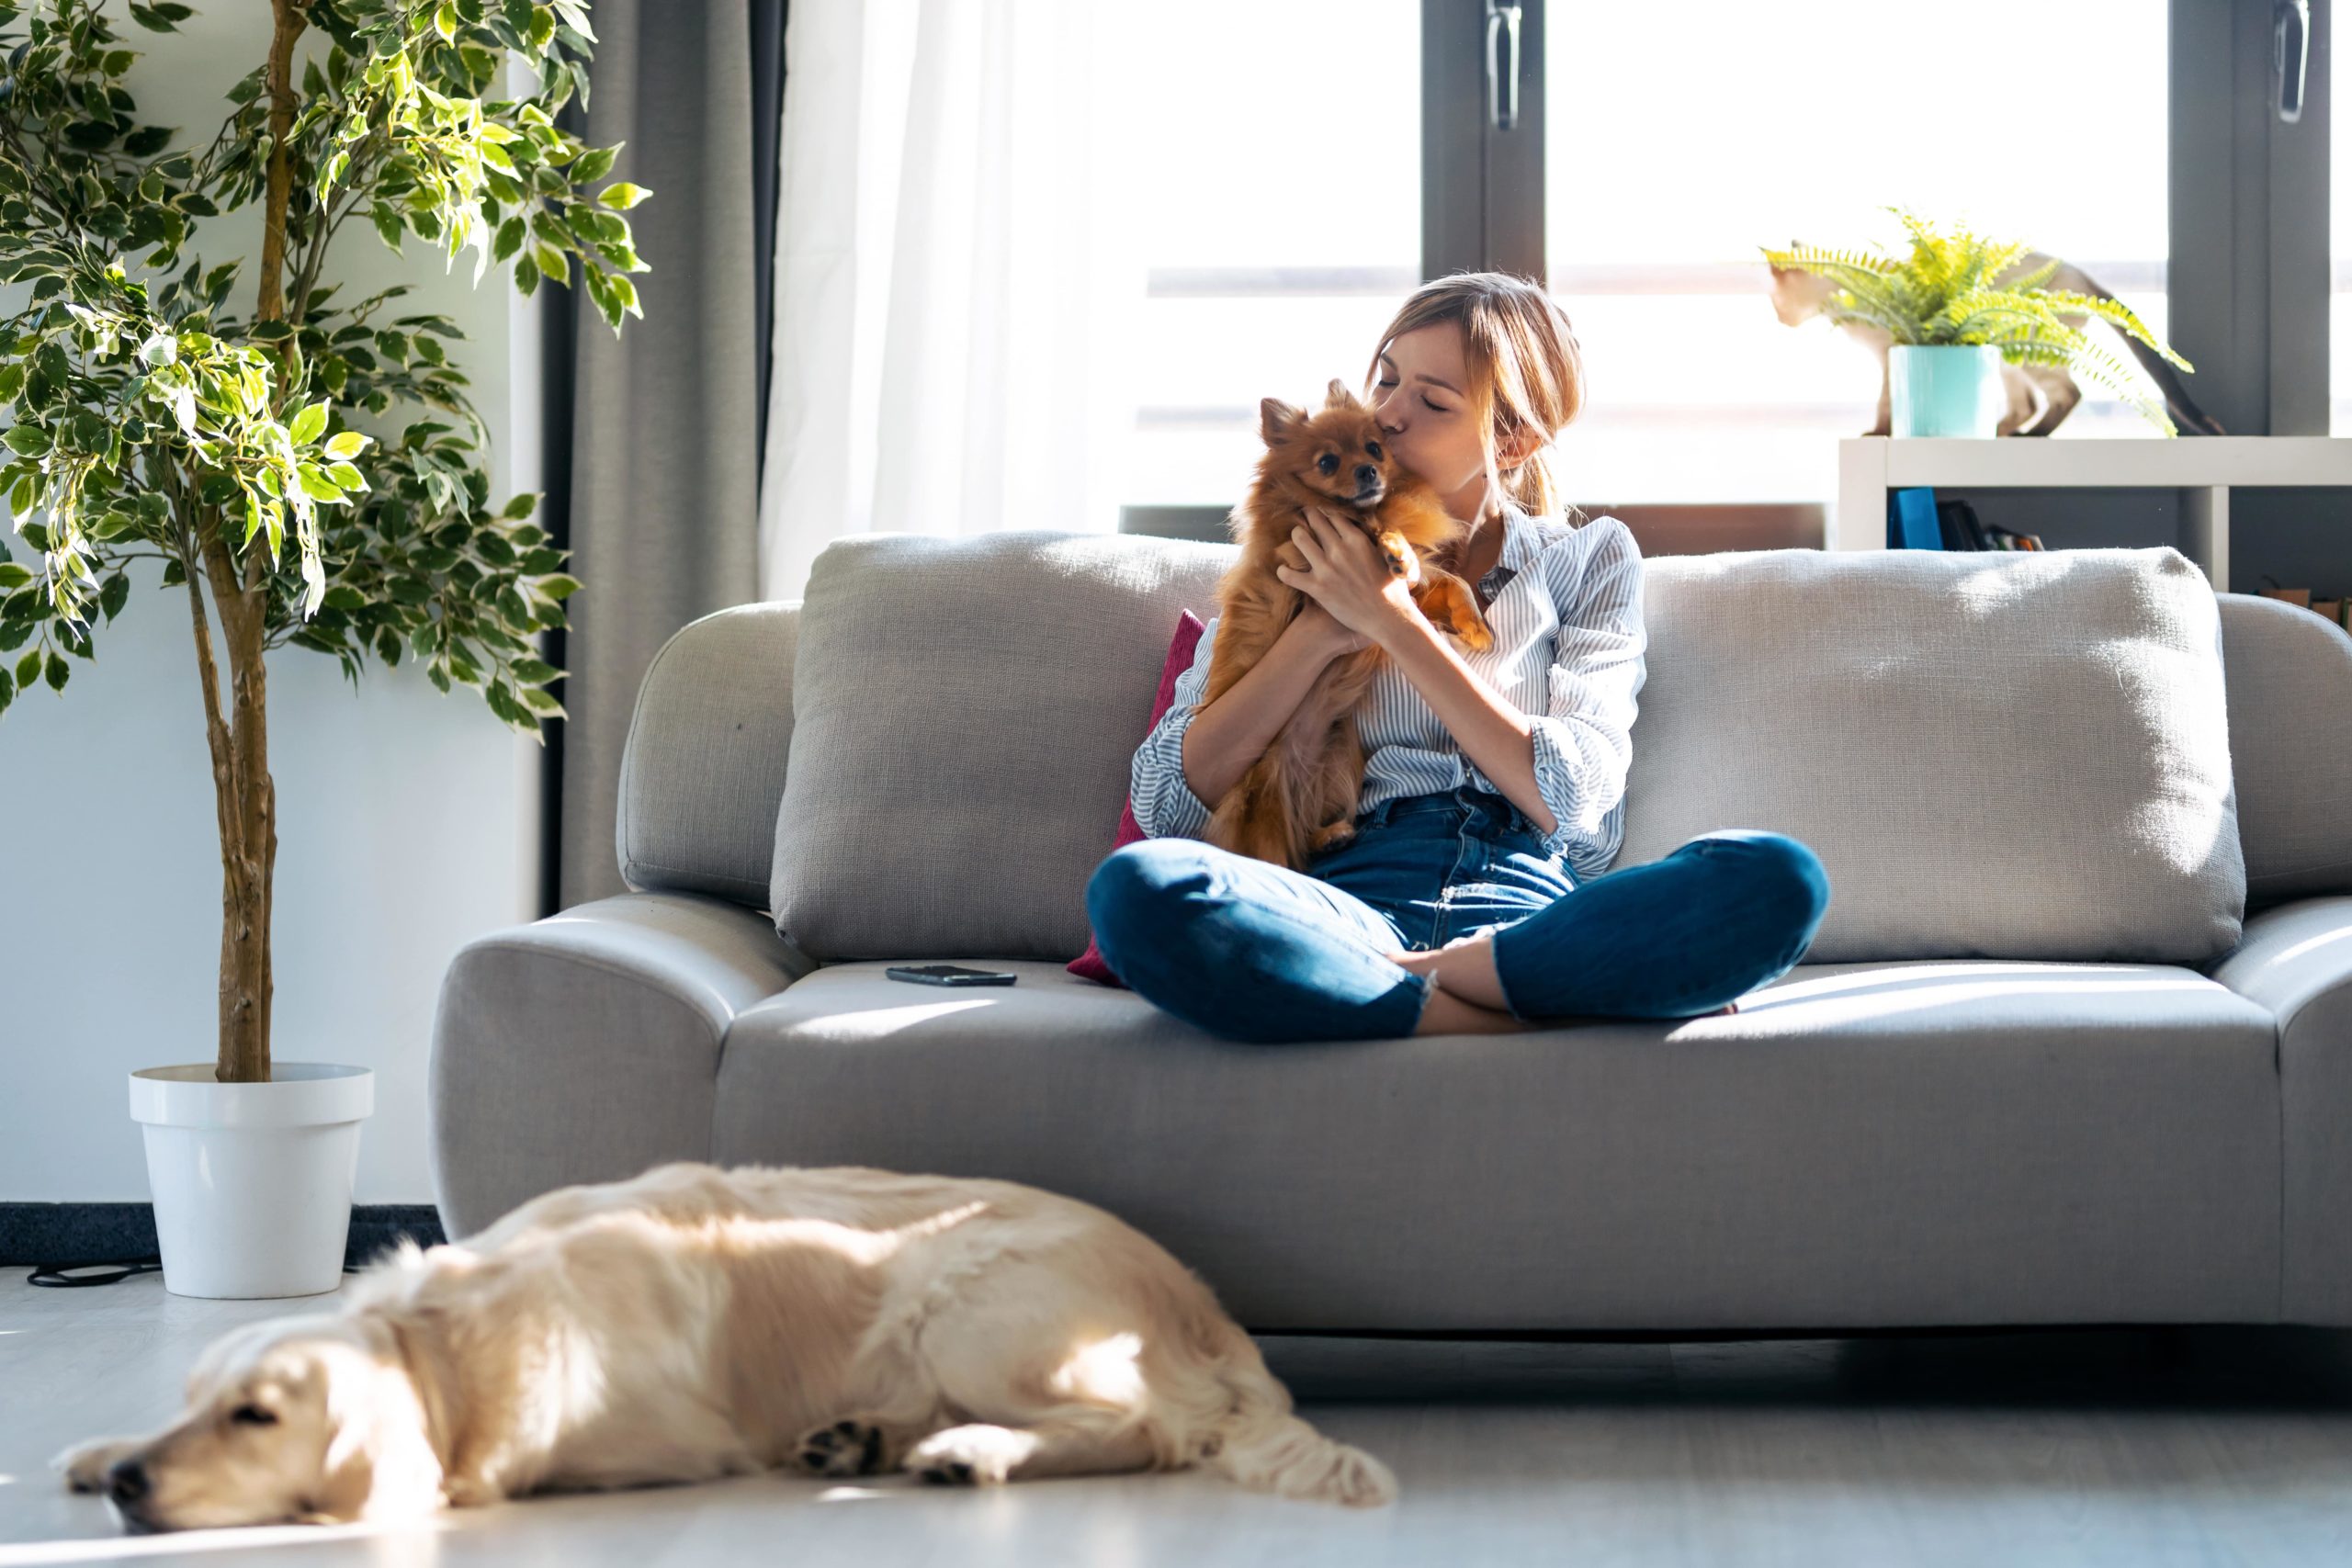 Should San Diego Rental Property Owners Rent to People with Pets? - Article Banner